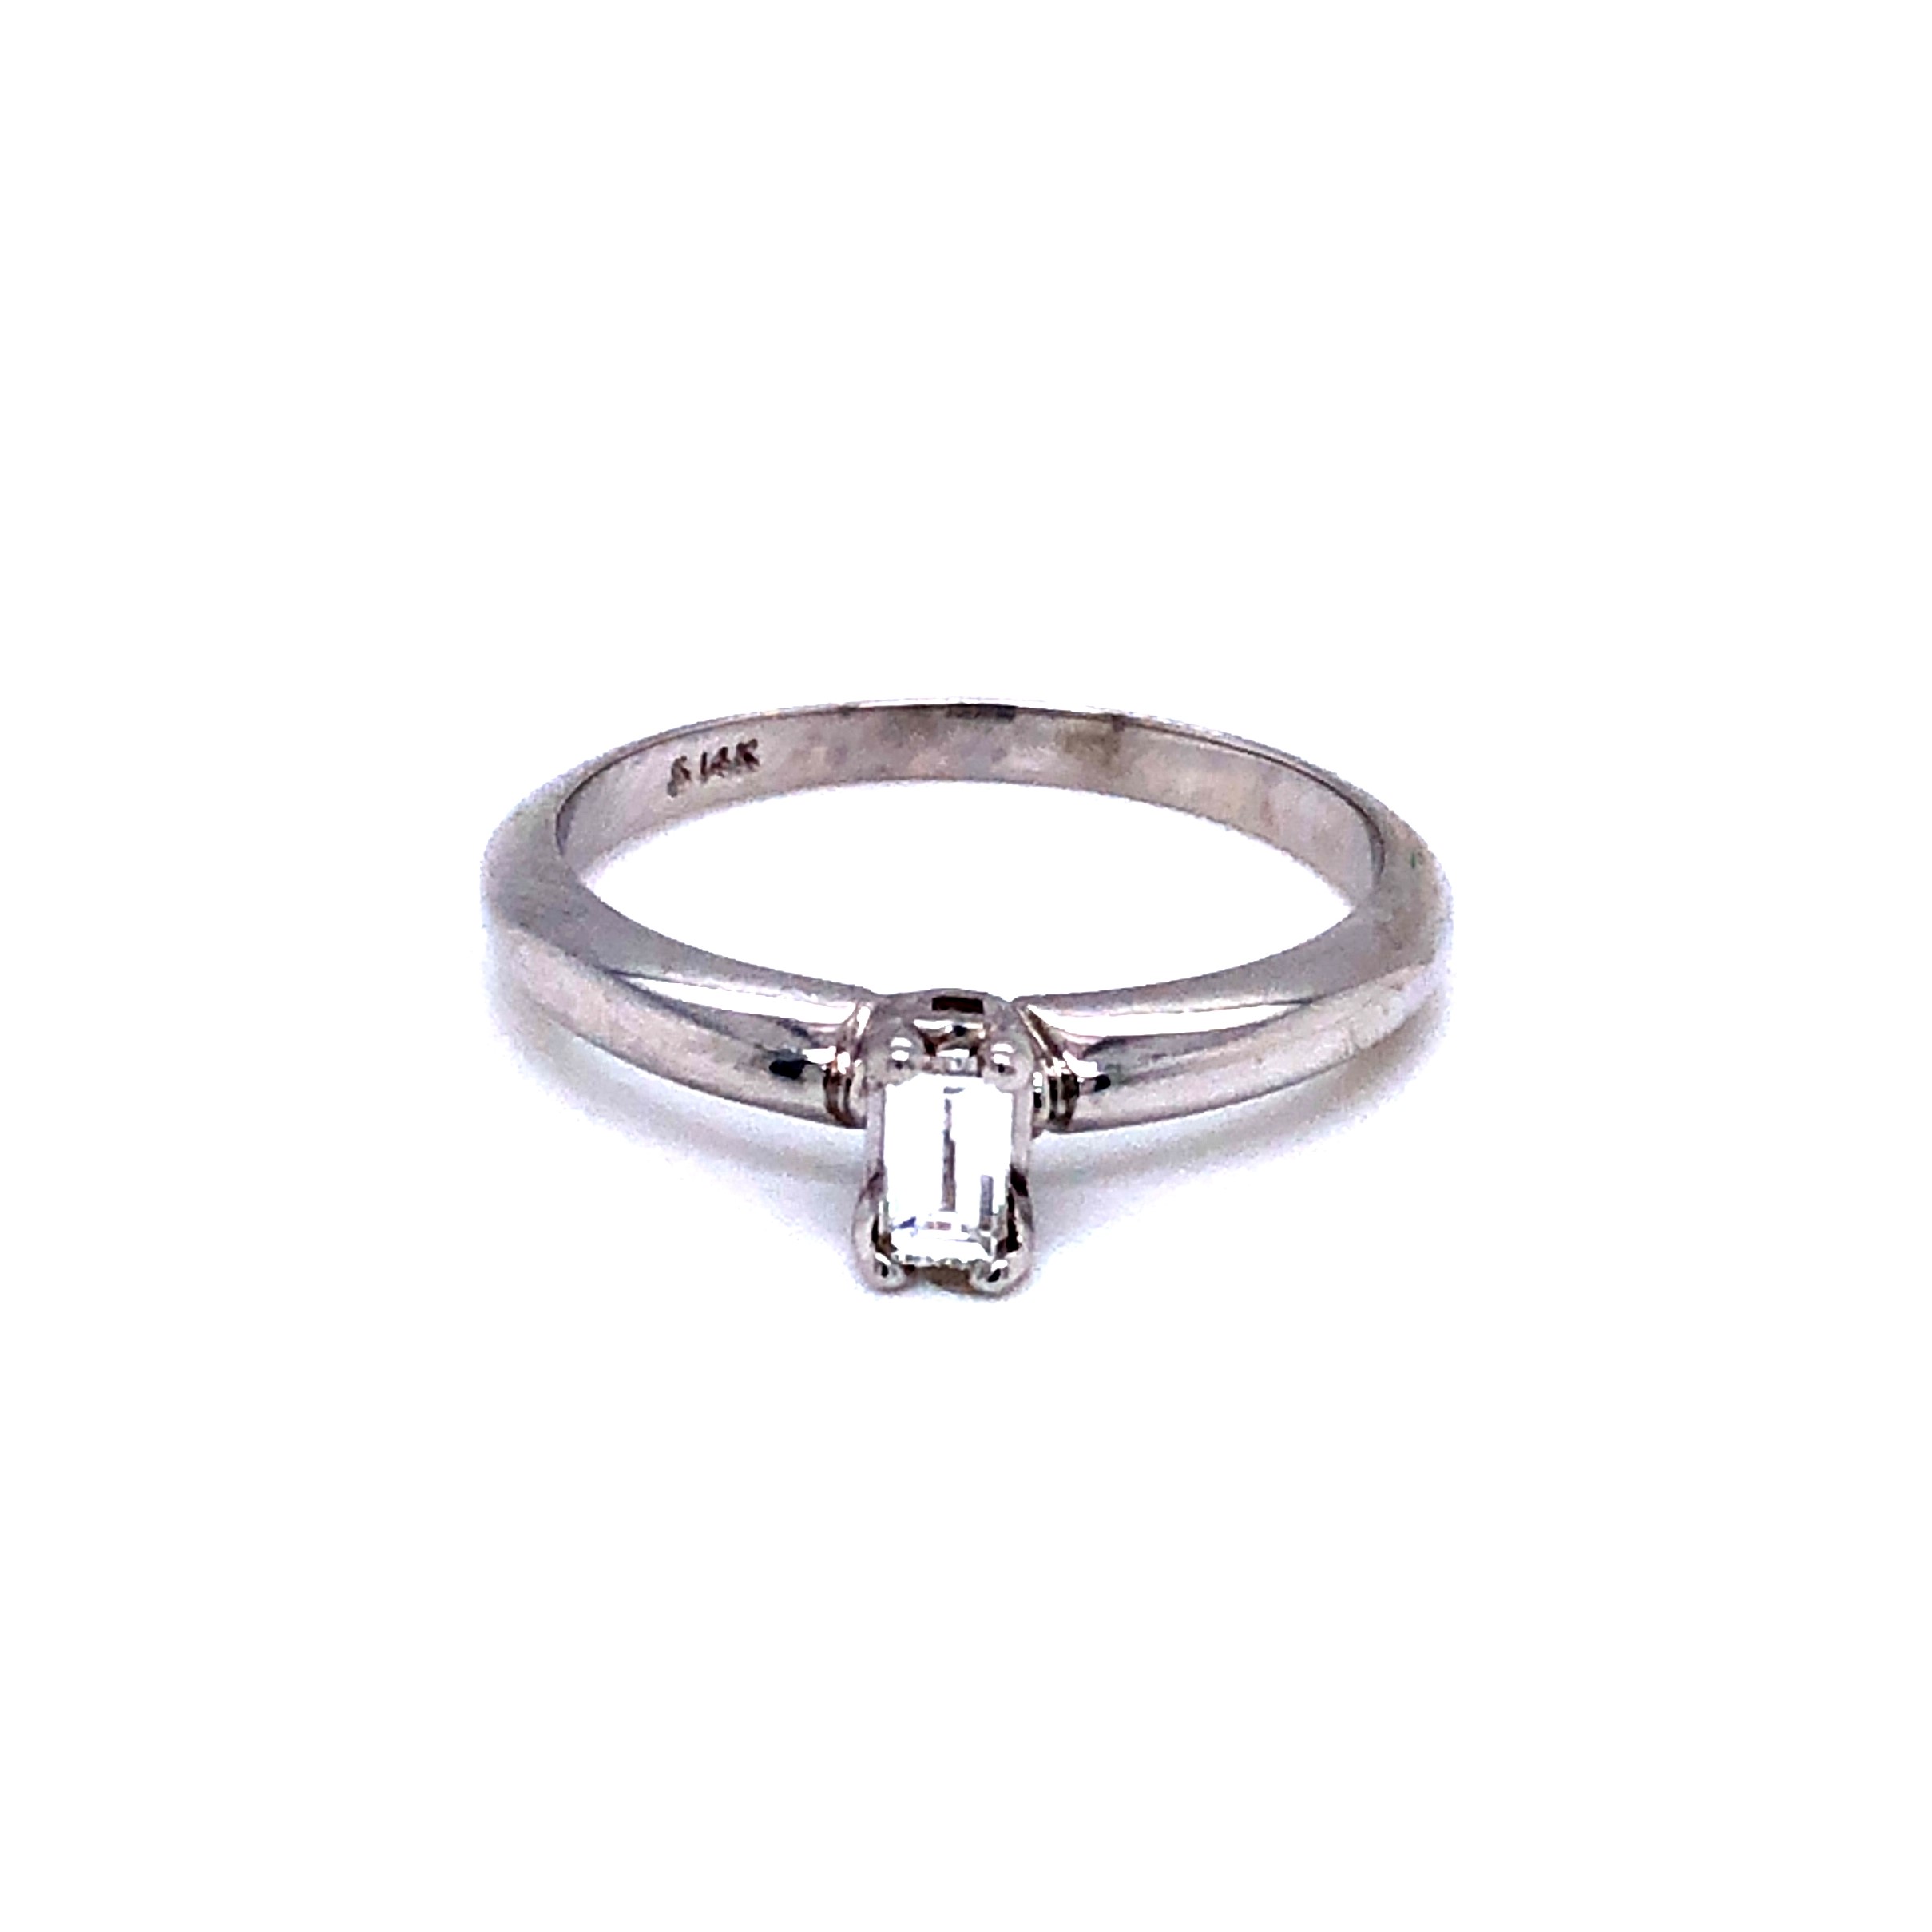 14 karat white gold solitaire engagement ring with an emerald cut Diamond weighing 0.18 carat  F color  VS1 clarity.